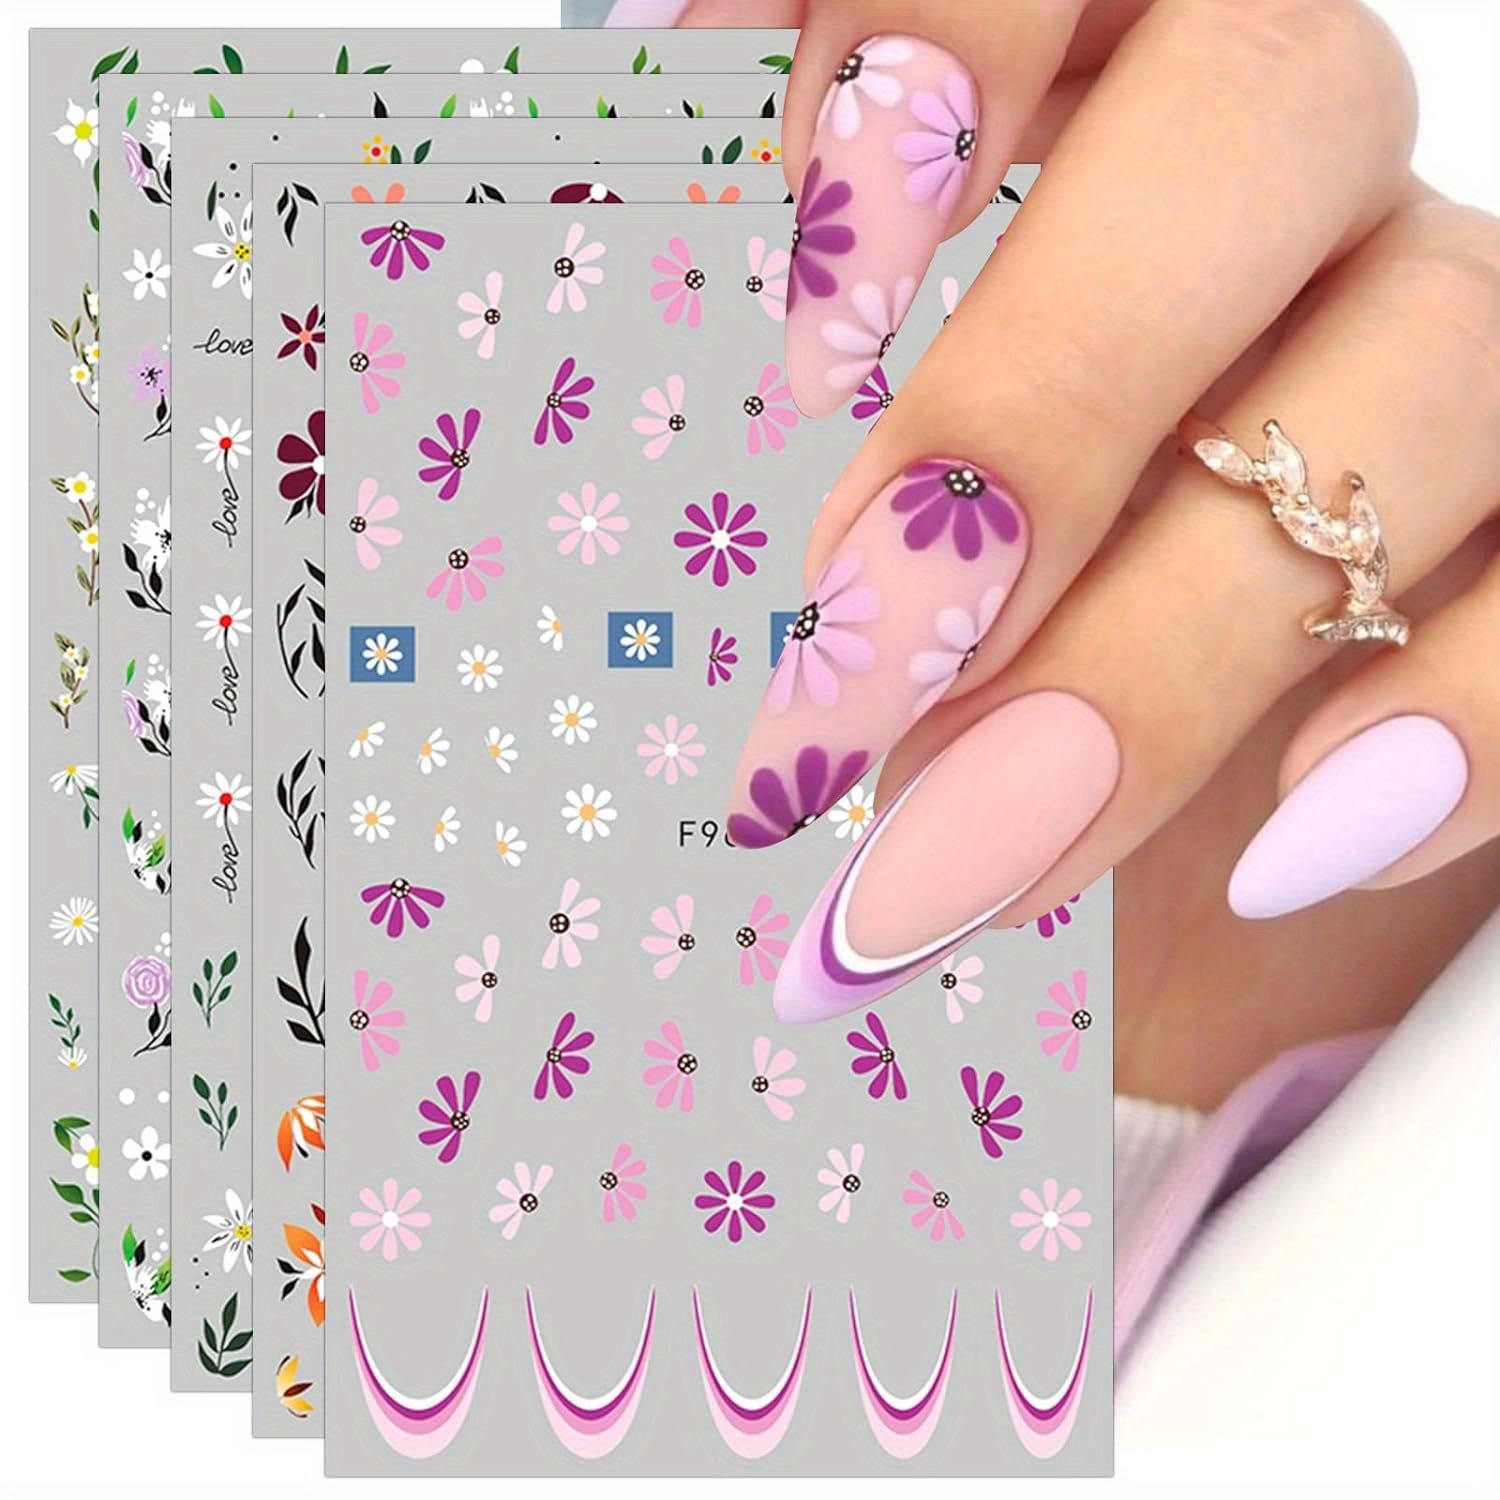 

10 Sheets Flower Daisy Design Nail Art Stickers Decals Self-adhesive Spring Summer Floral Nail Supplies Nail Art Design Decoration Accessories